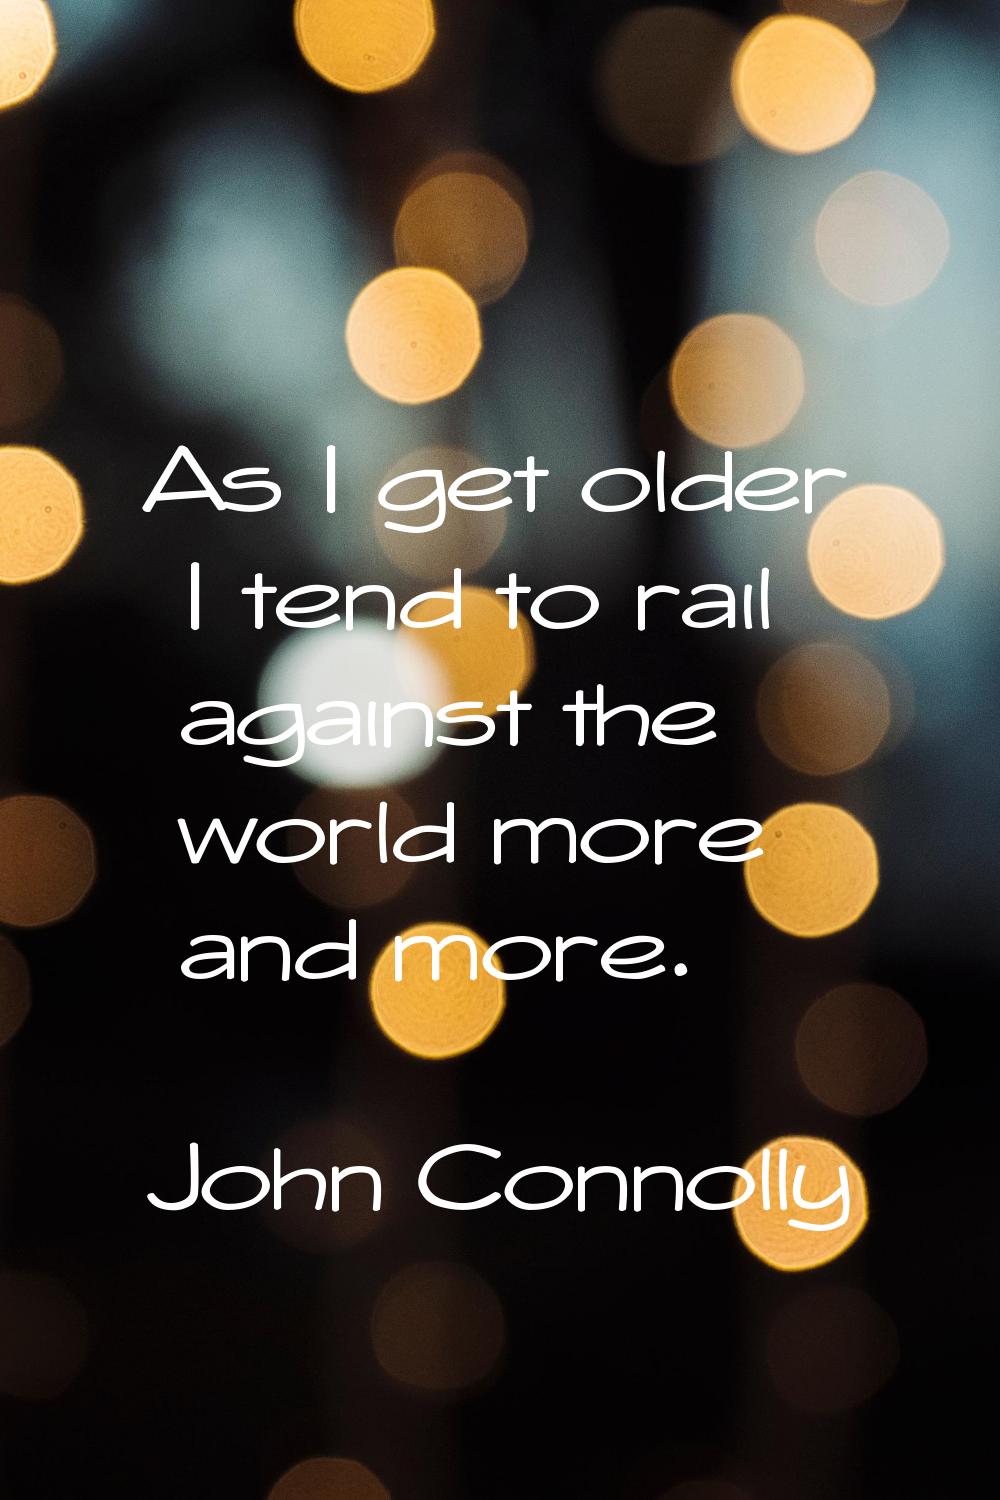 As I get older I tend to rail against the world more and more.